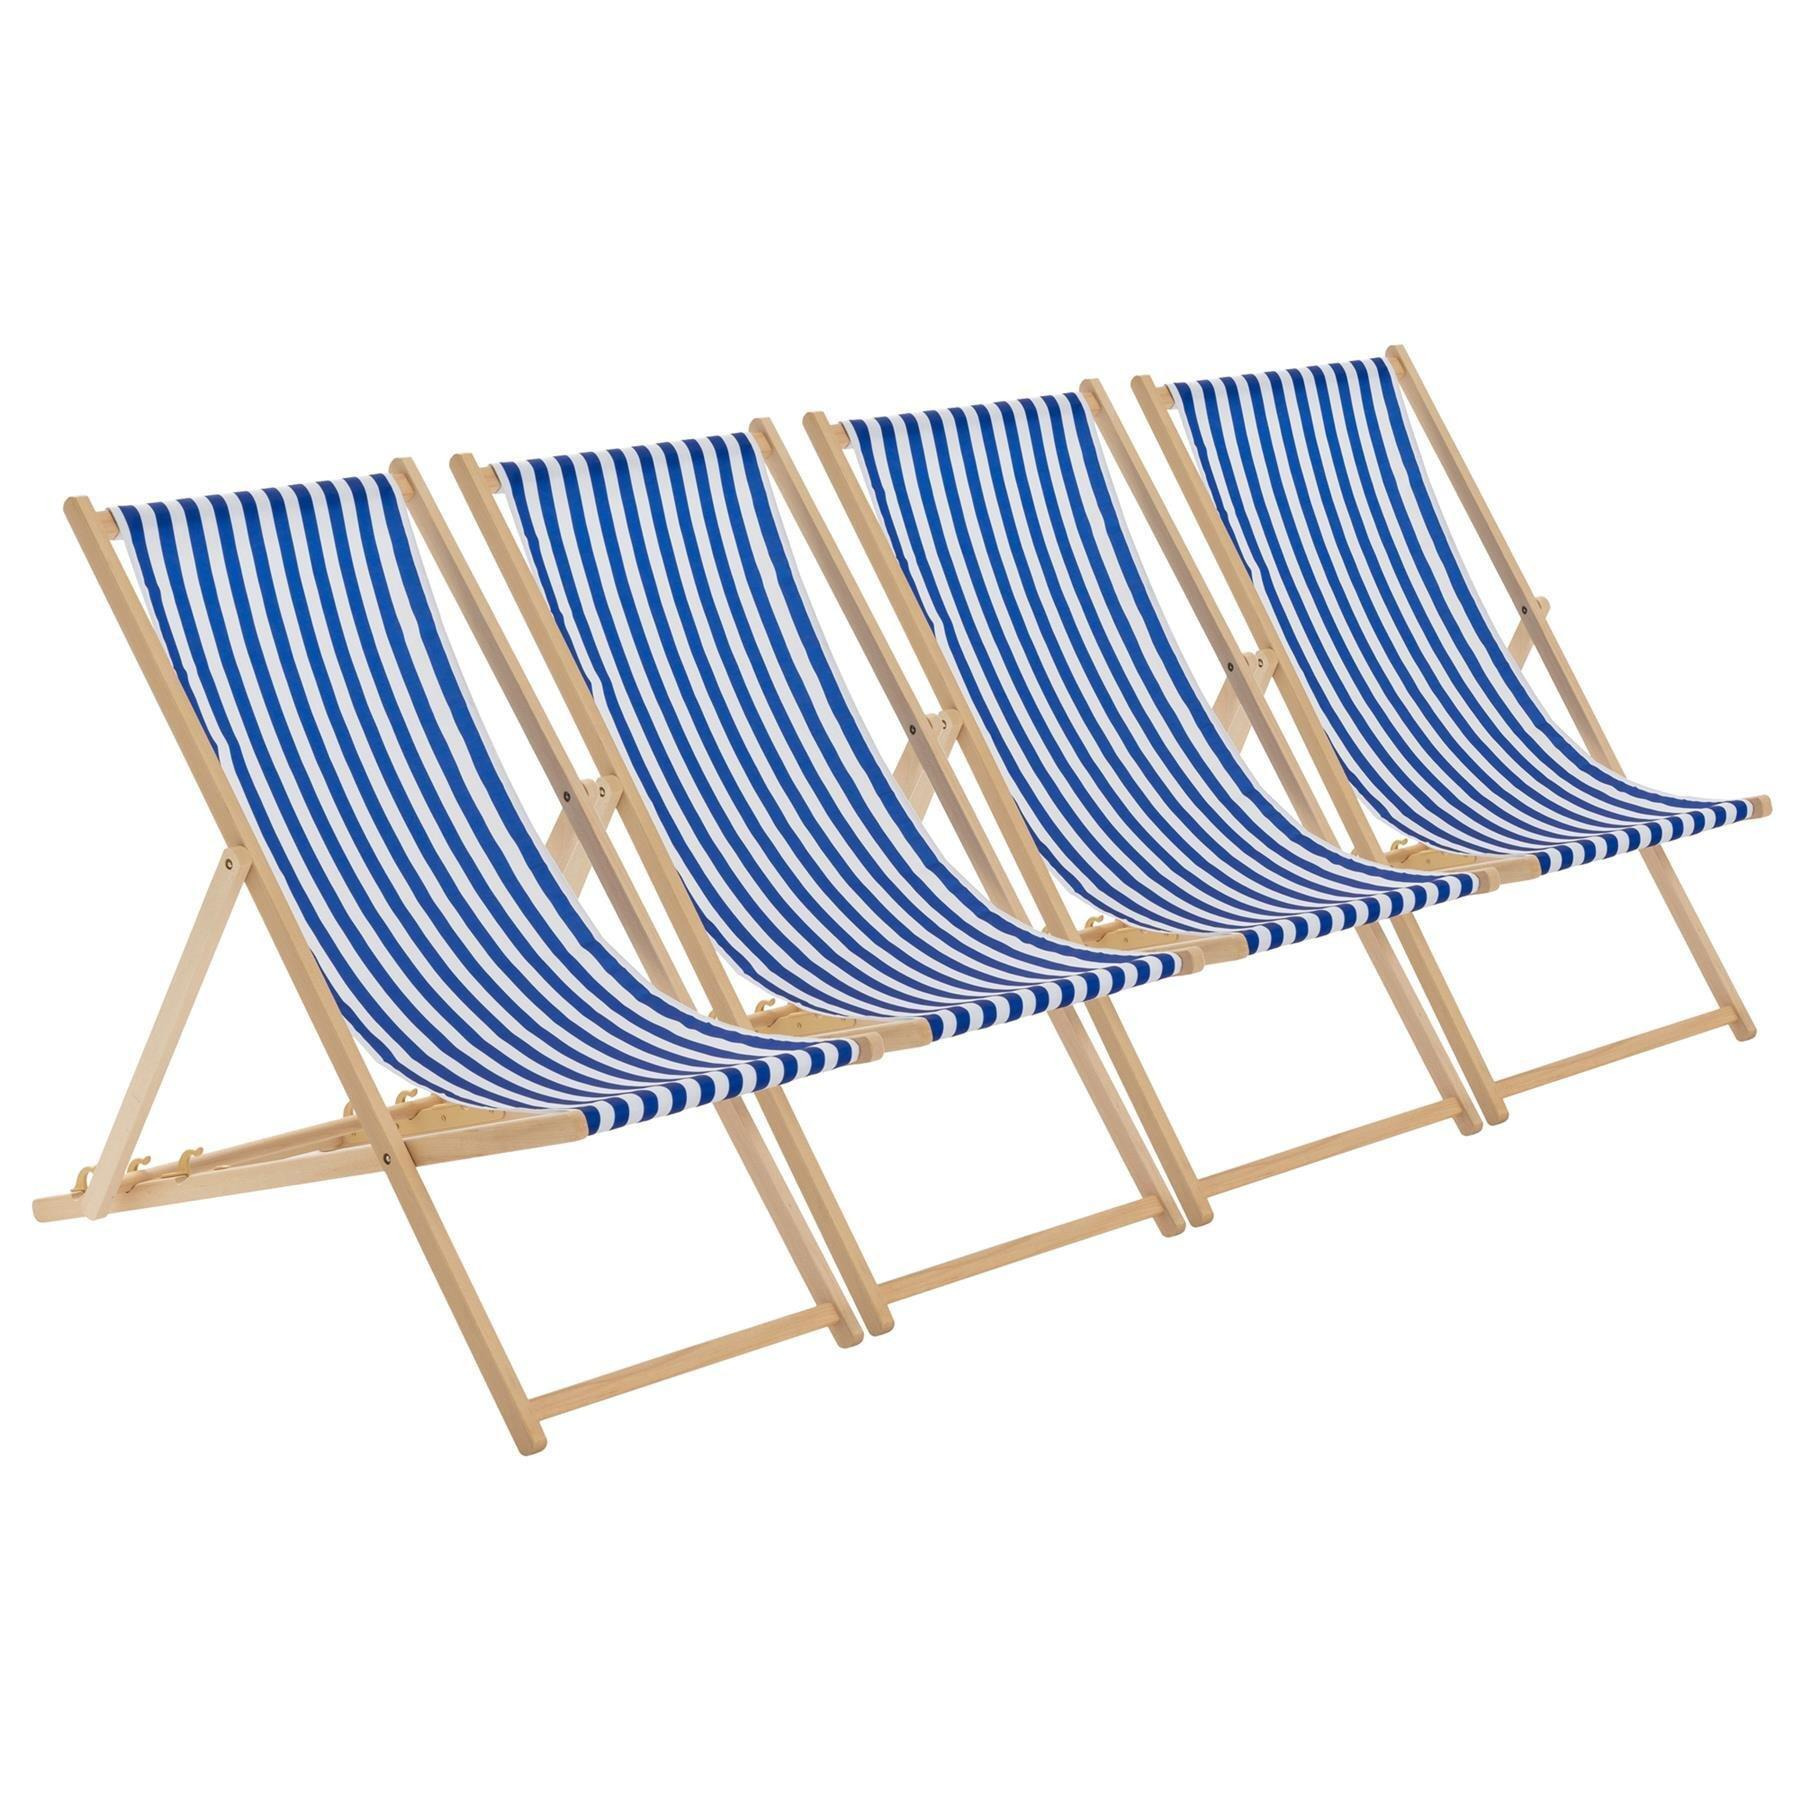 Folding Wooden Deck Chairs Navy Stripe Pack of 4 - image 1